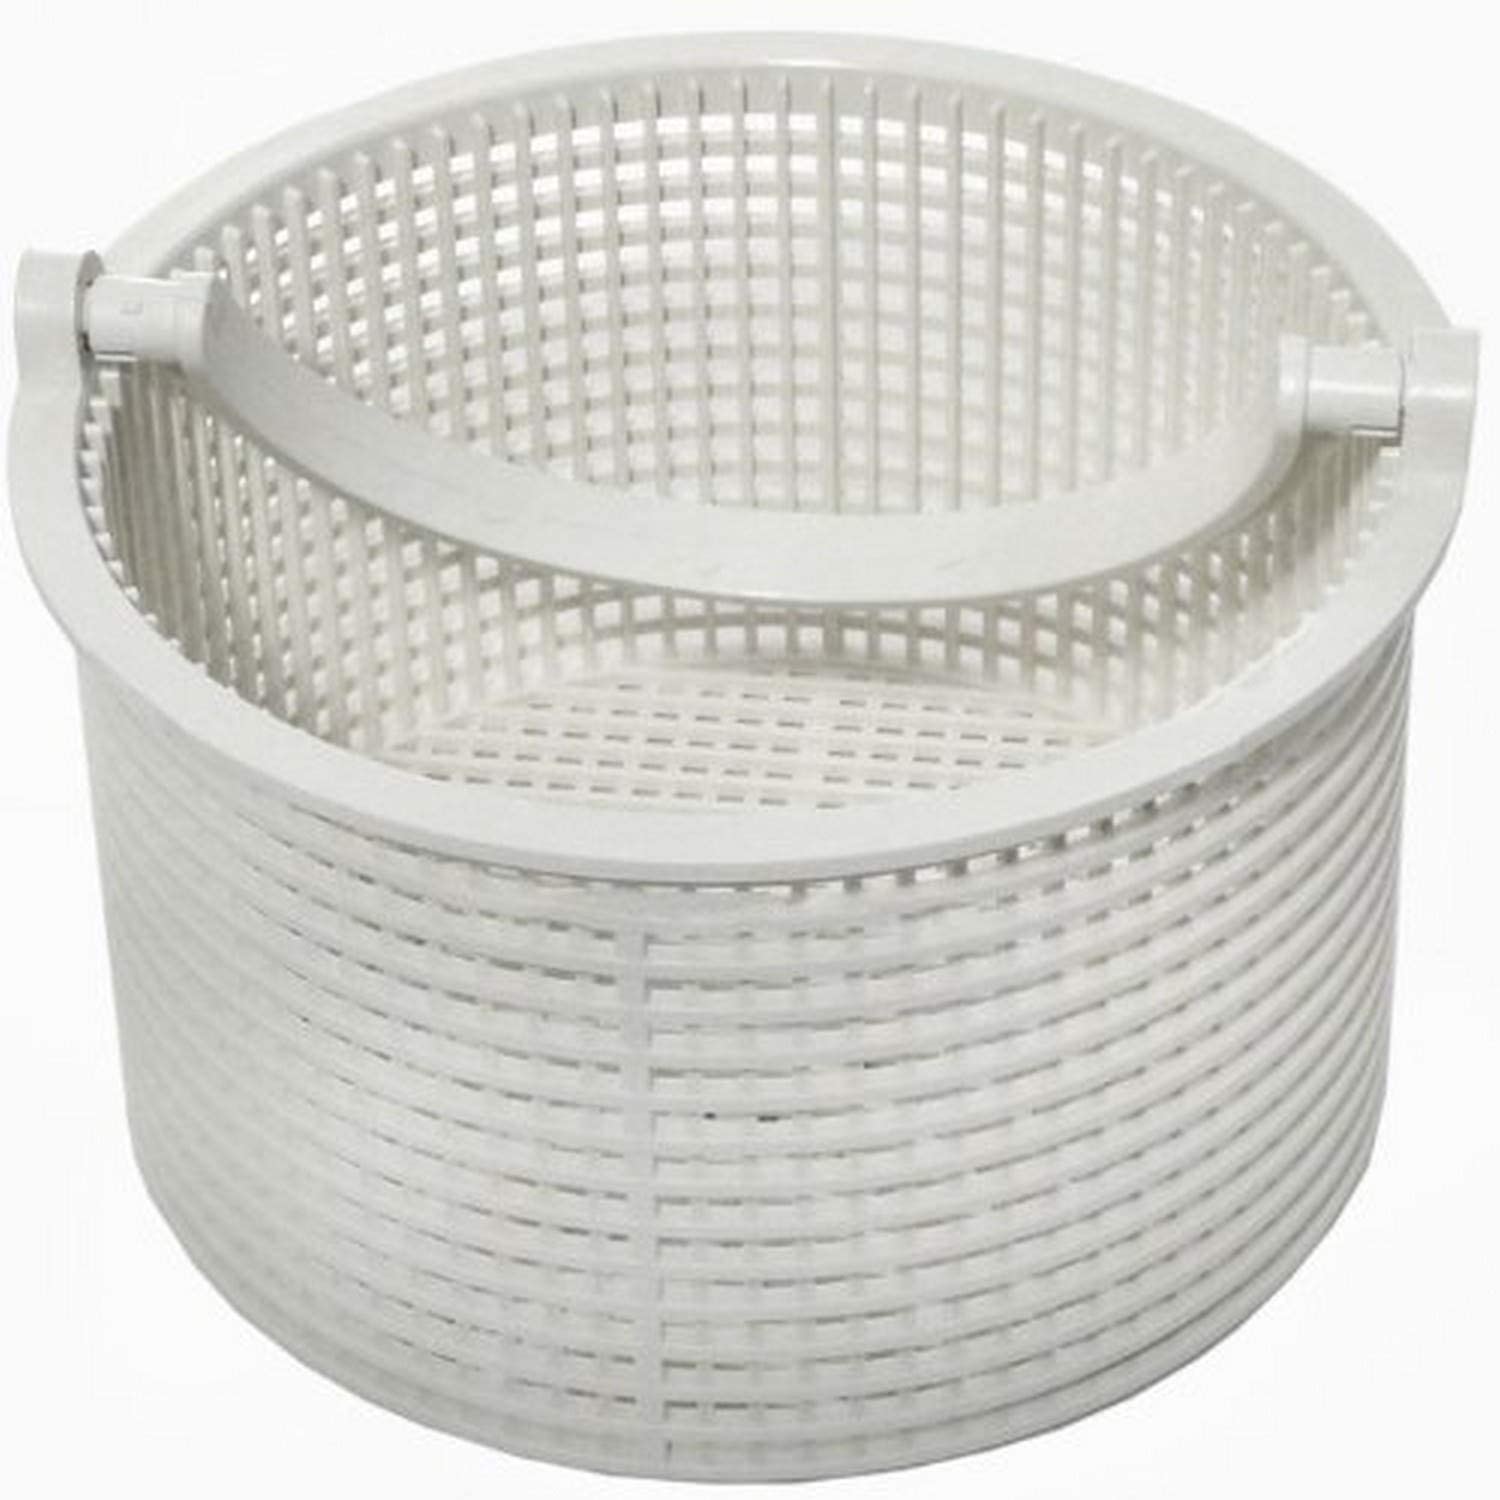 Guardian Filtration Products G-HAY1096-01 Basket Replacement For Hayward sp1096c, R38010